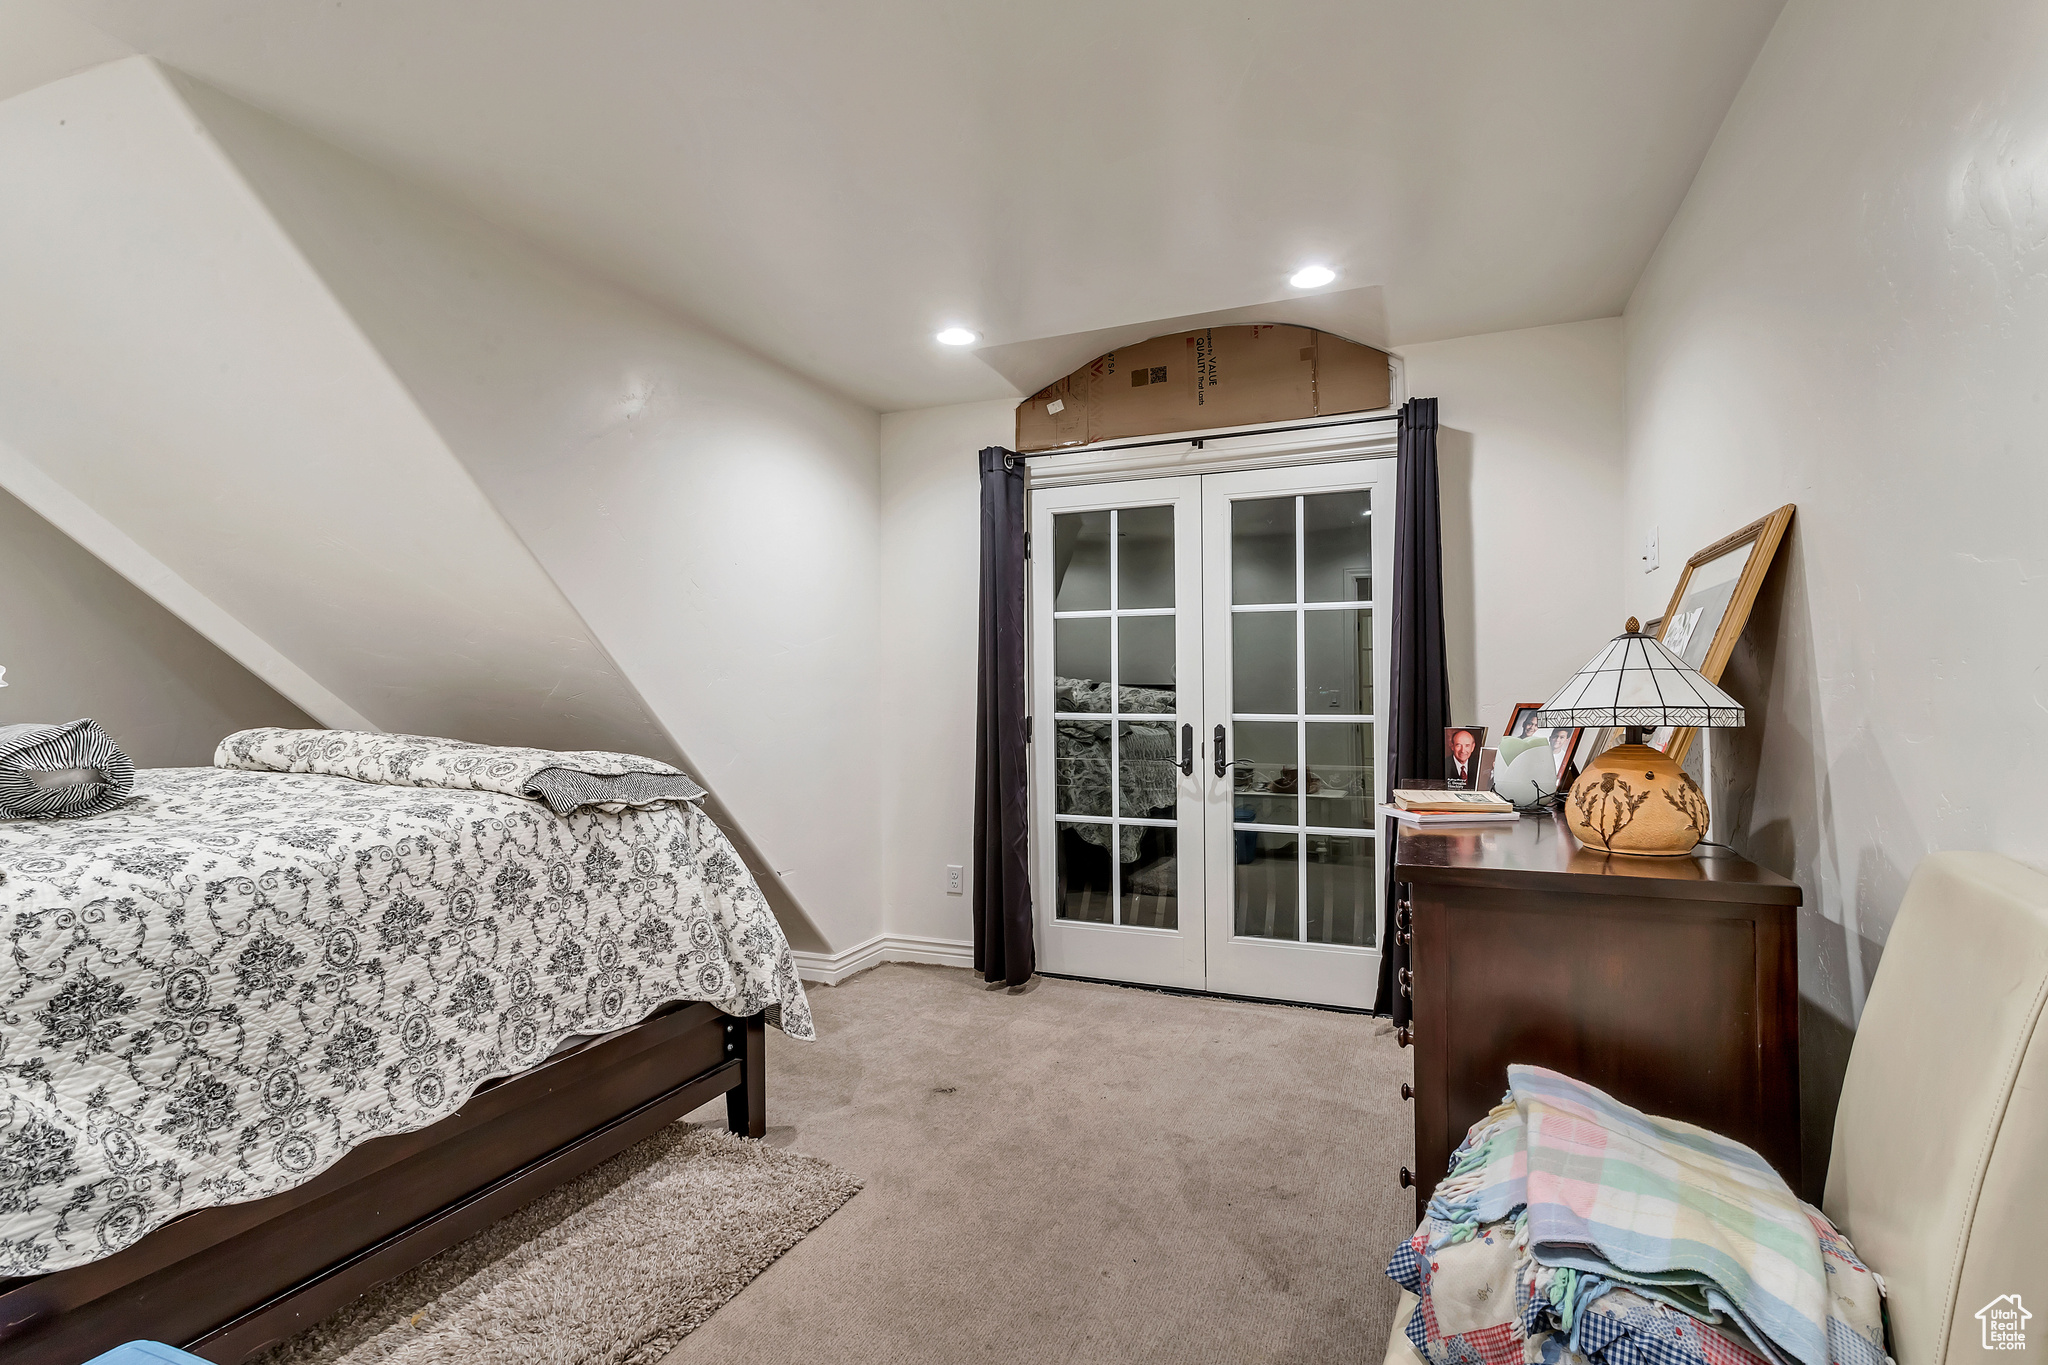 Carpeted bedroom with lofted ceiling and french doors